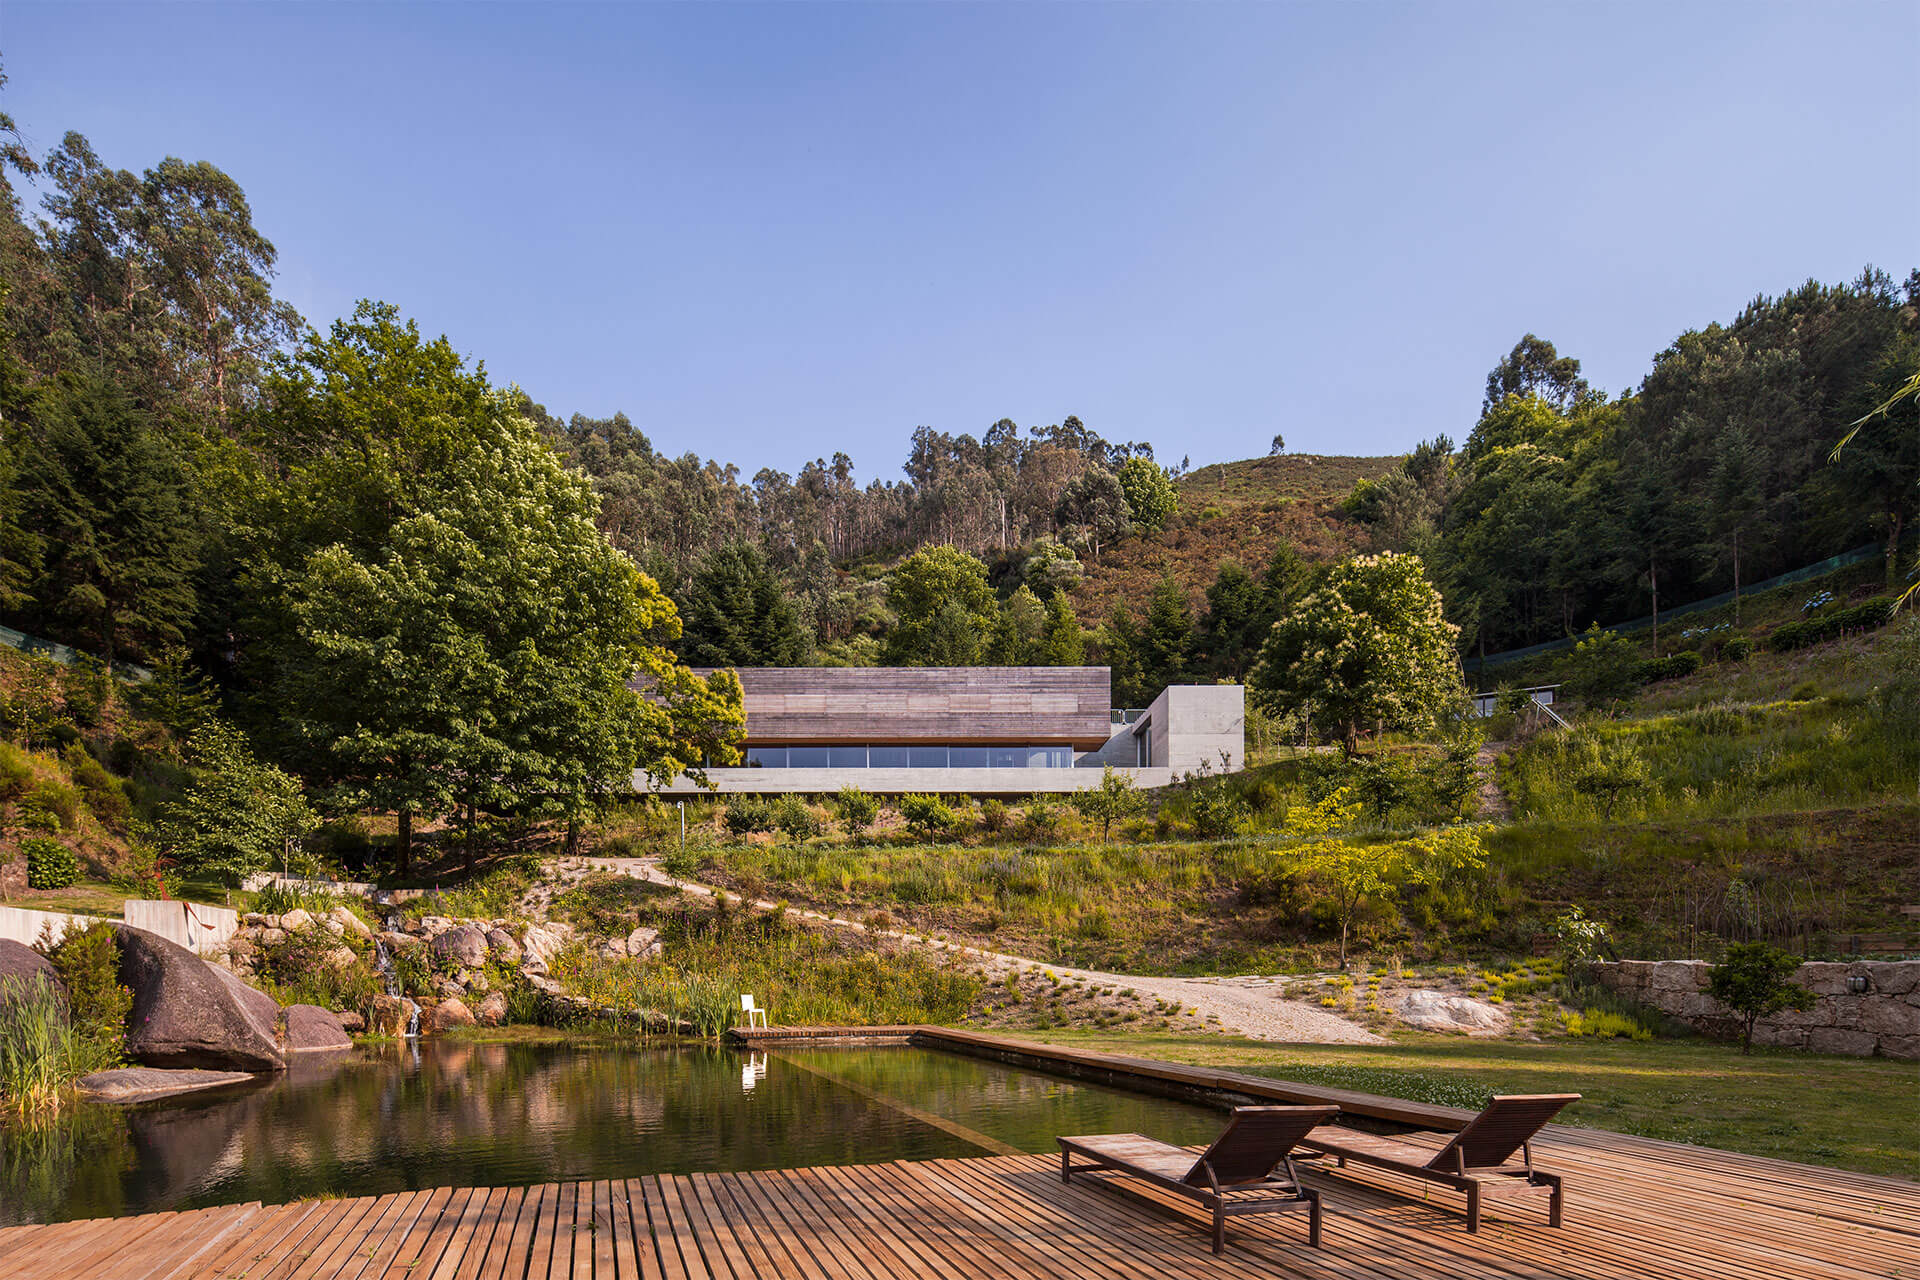 The Gerês House's lower wooden deck and pond area, with the house itself visible in the background. 